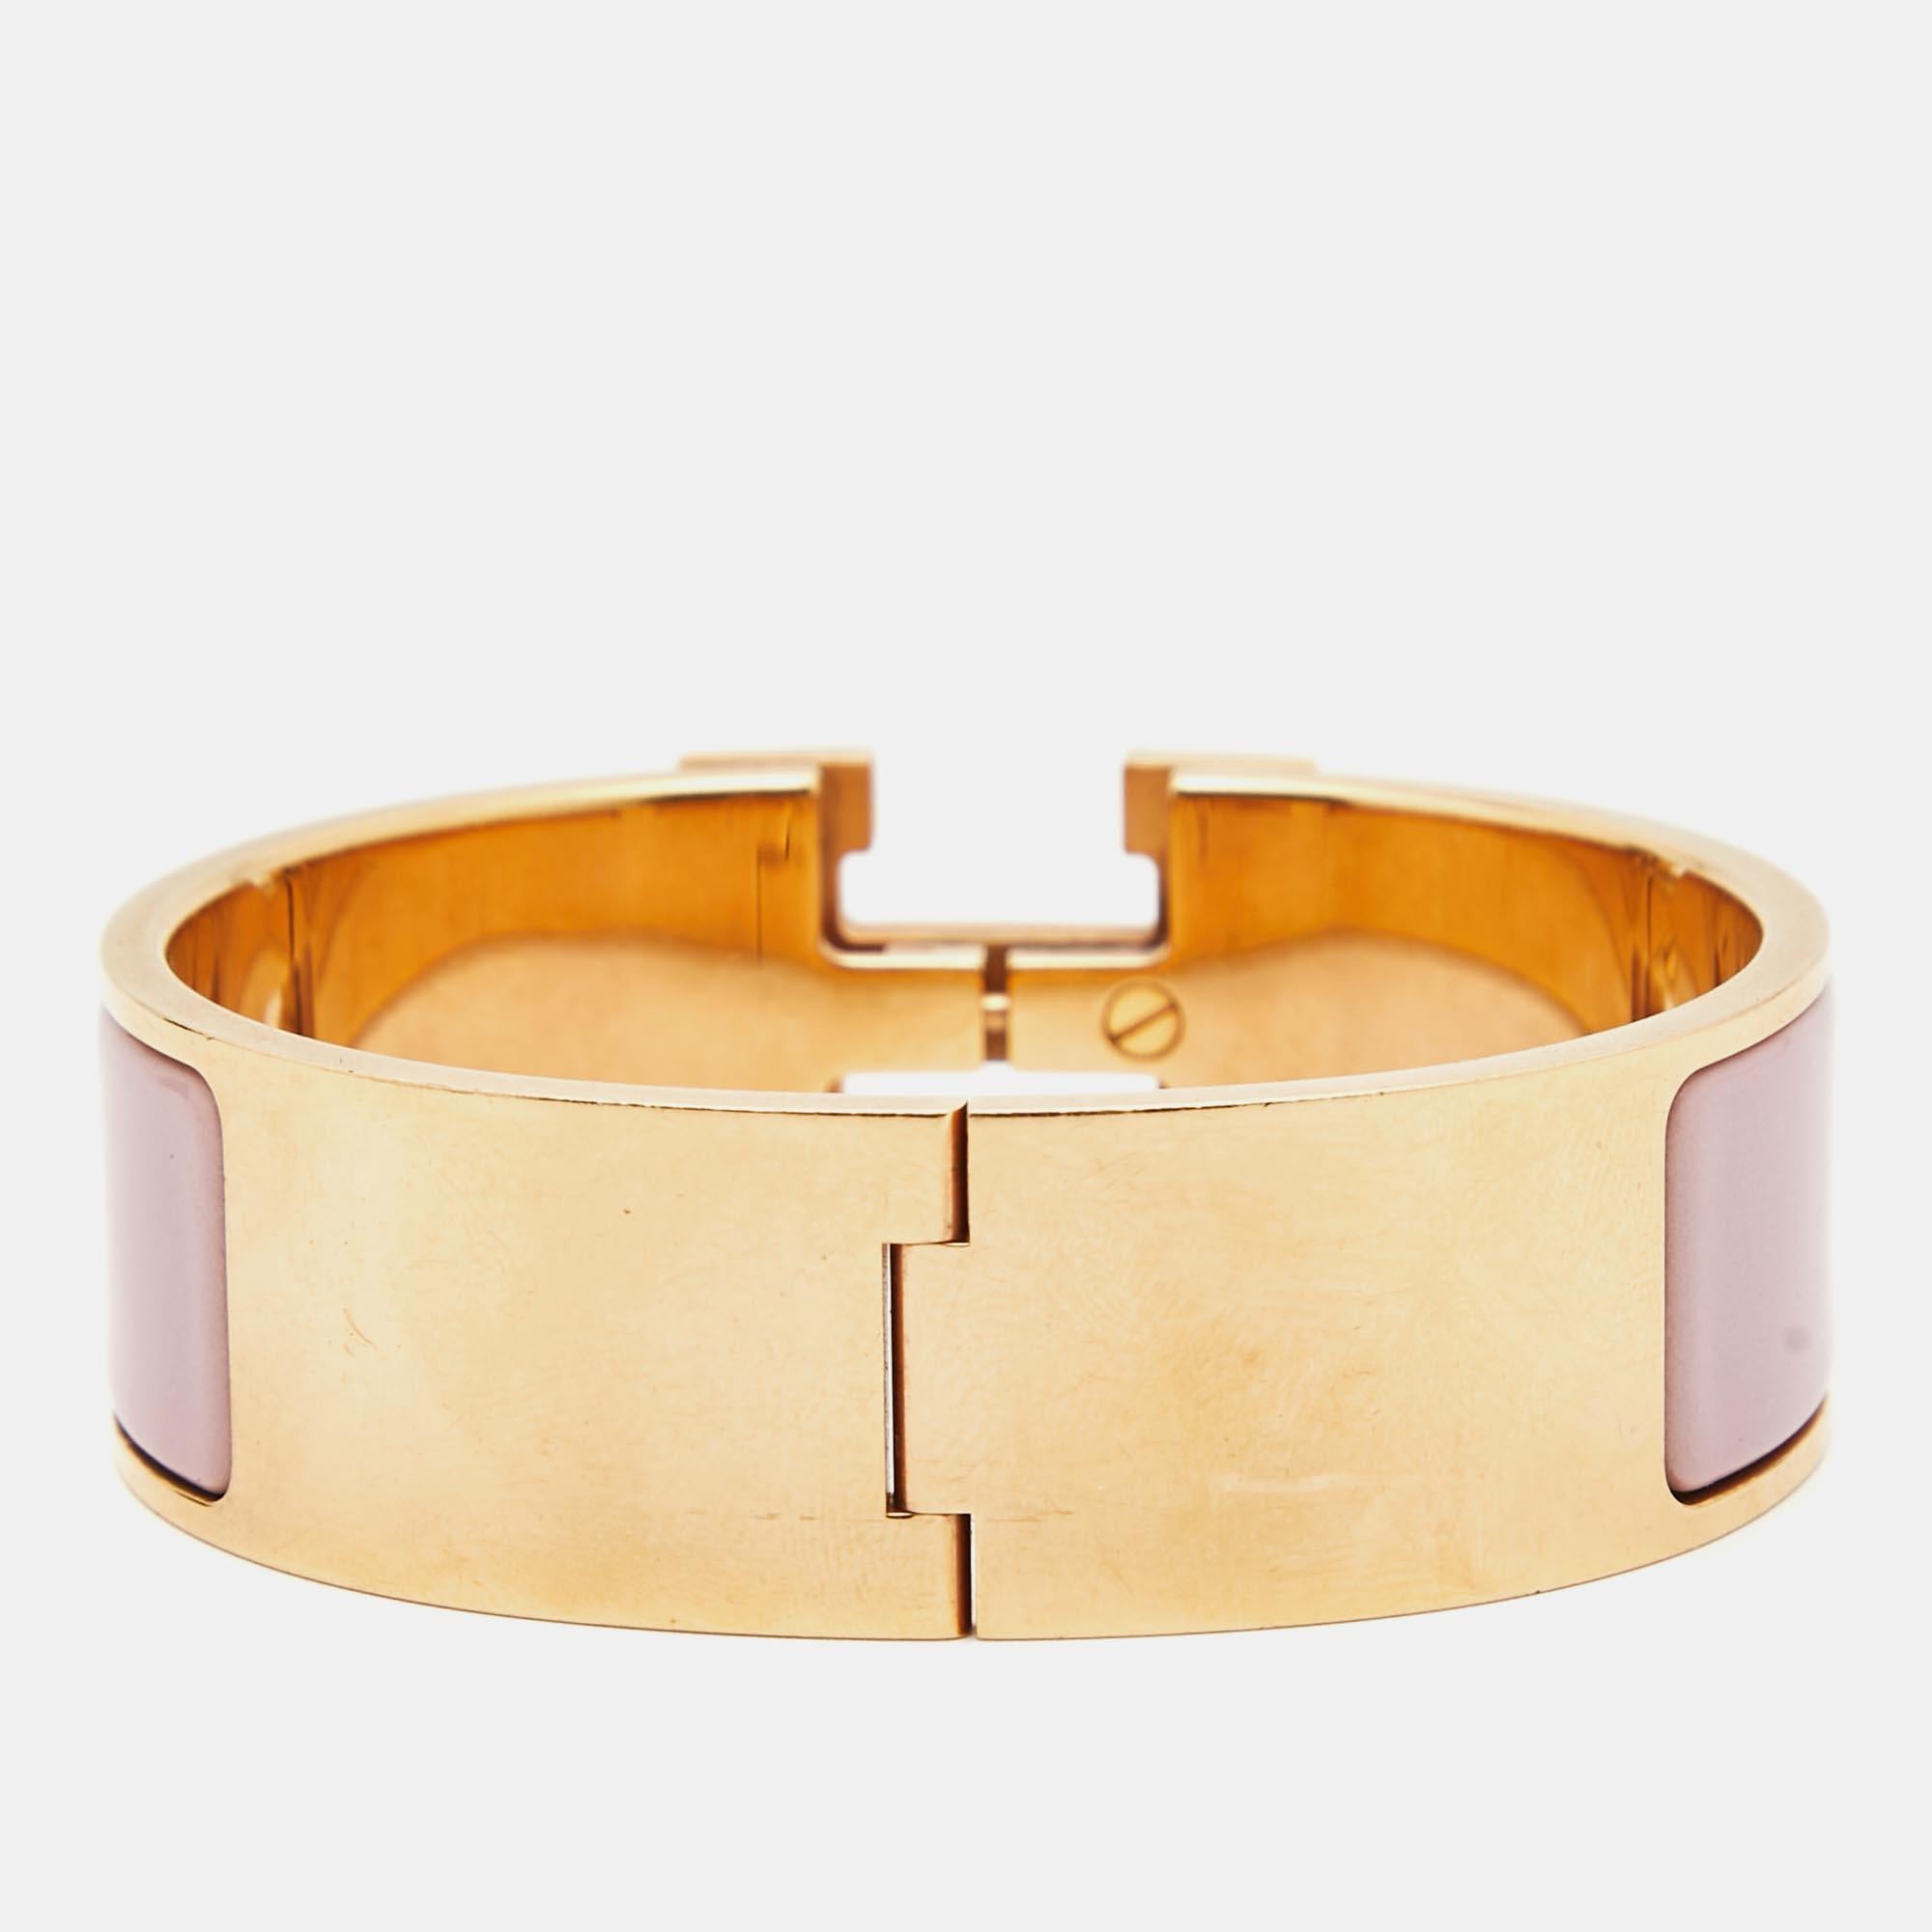 The Hermès Clic Clac H bracelet is an exquisite piece of jewelry. It features a glossy enamel band with a prominent gold-plated H-shaped clasp, creating a striking contrast. This luxurious and elegant accessory embodies timeless style and